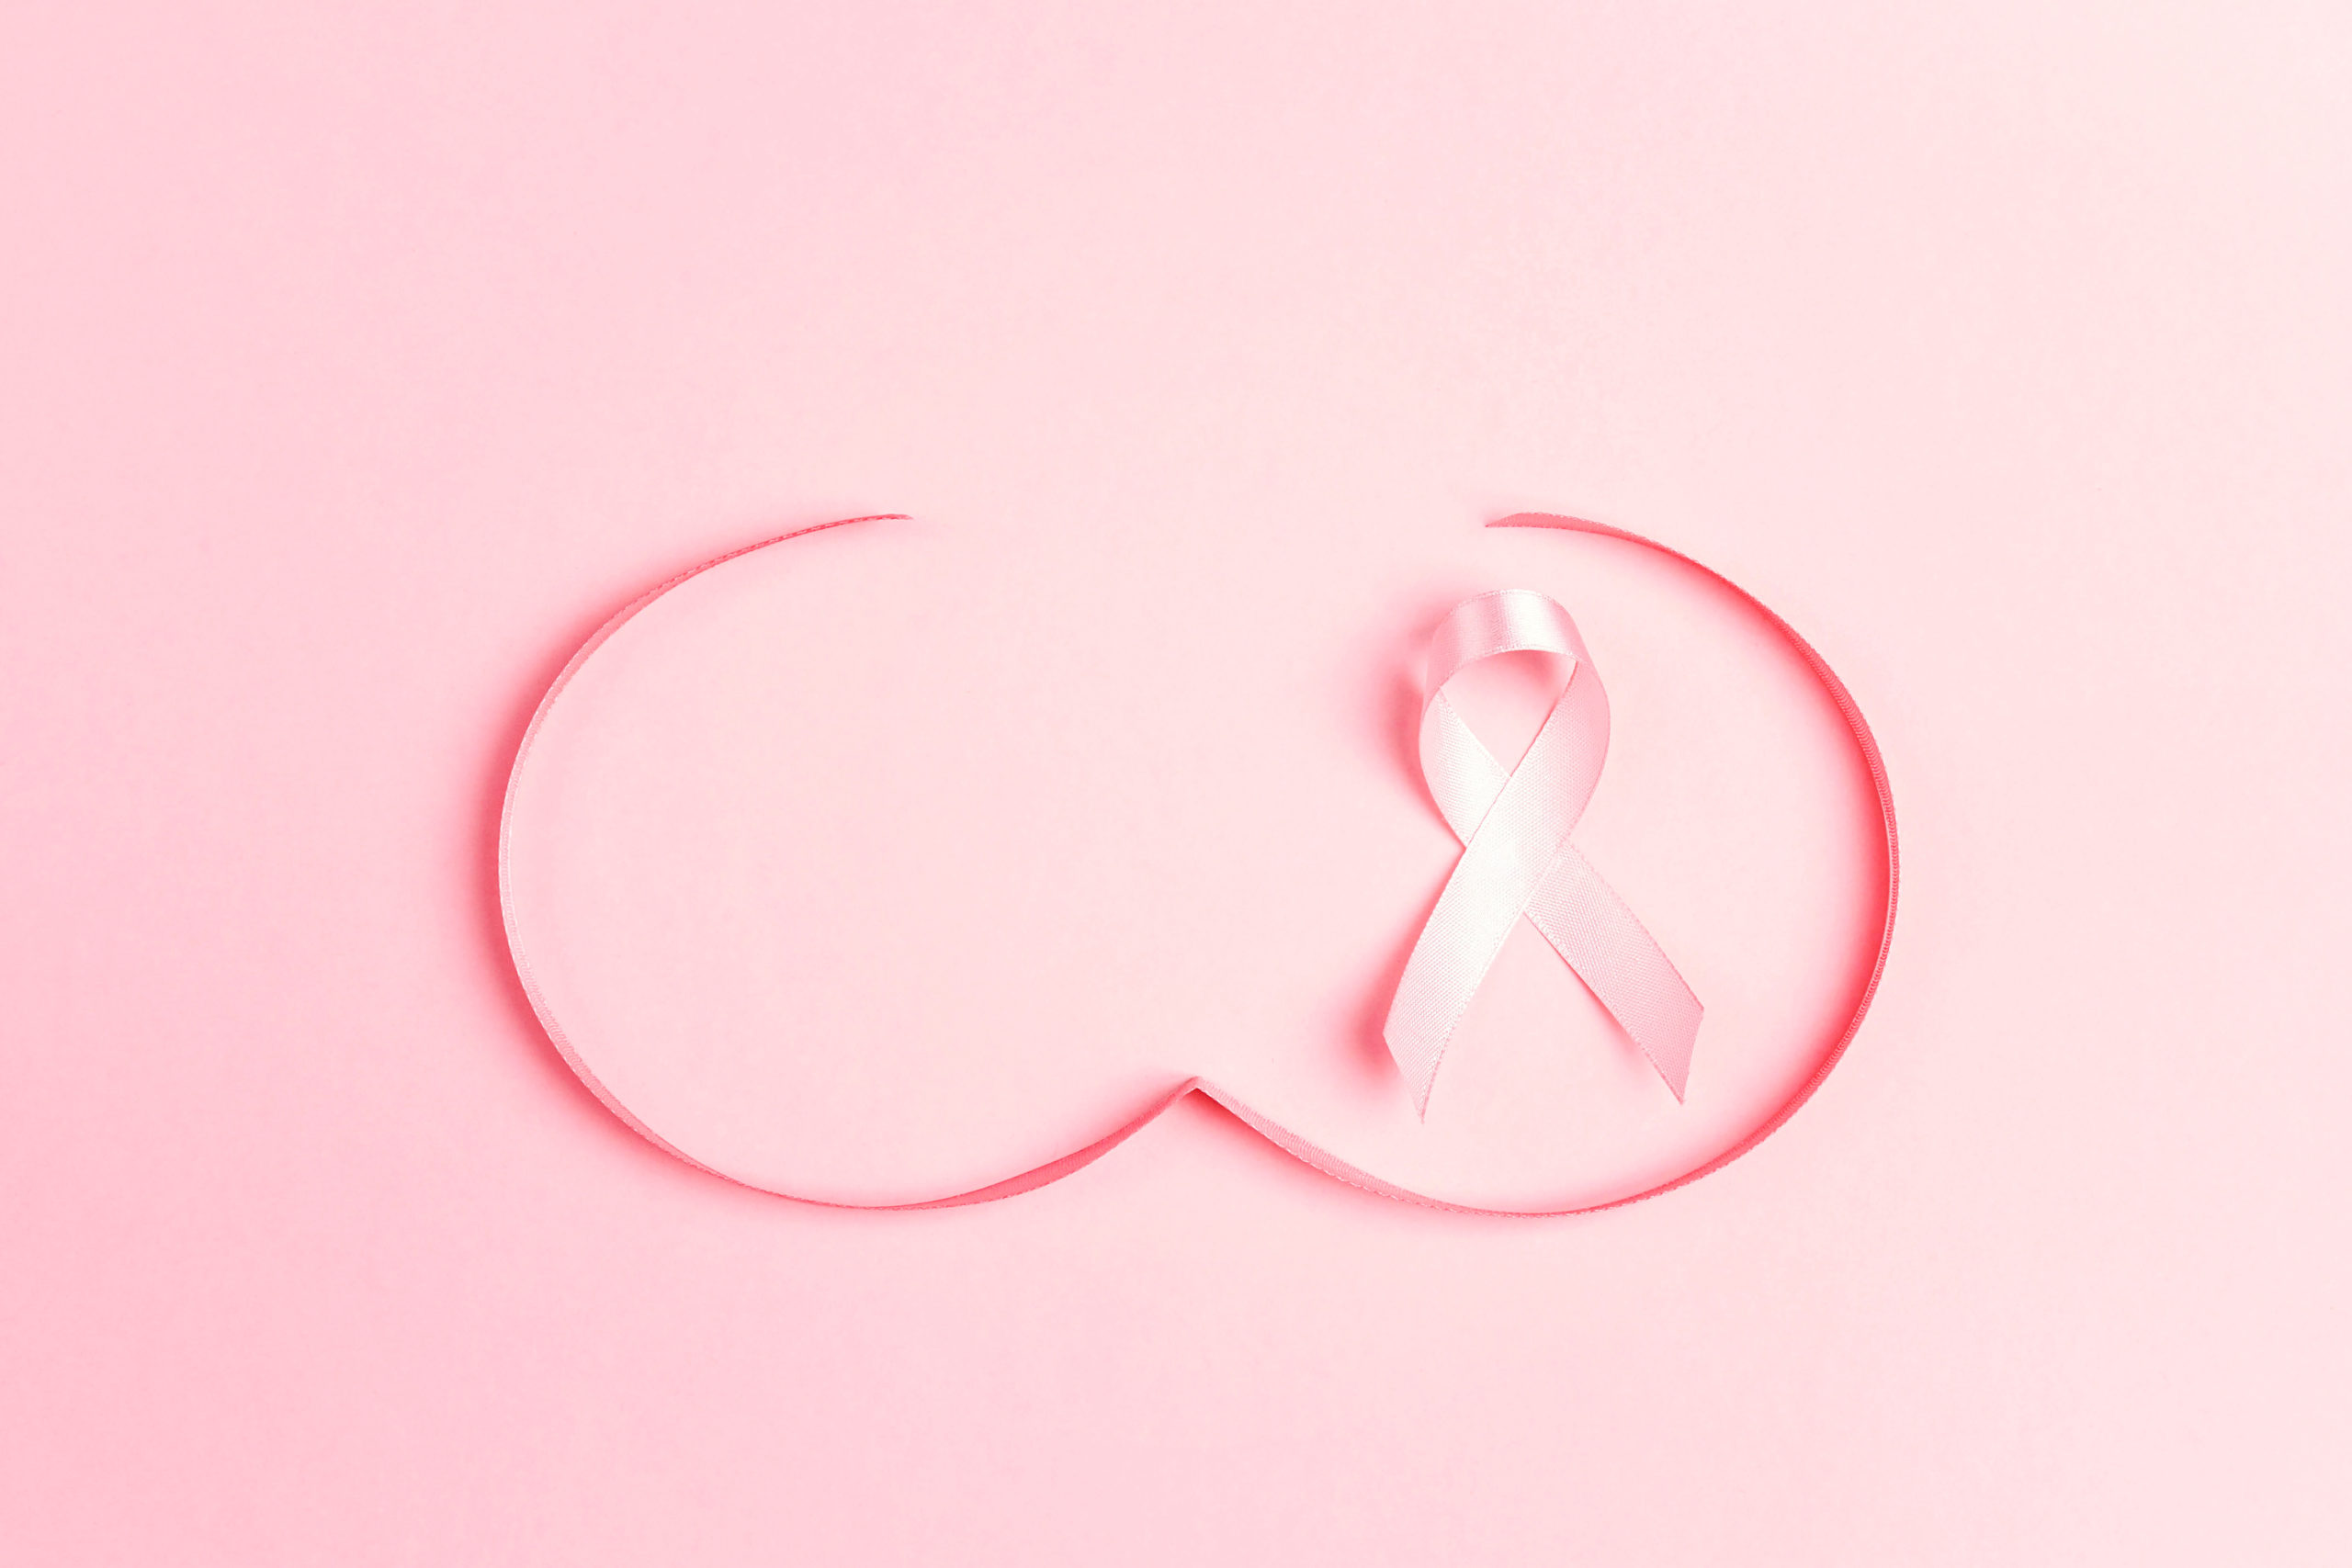 Pink ribbon with breast shape symbol on pink background.  Breast cancer awareness symbol. October awareness month campaign.